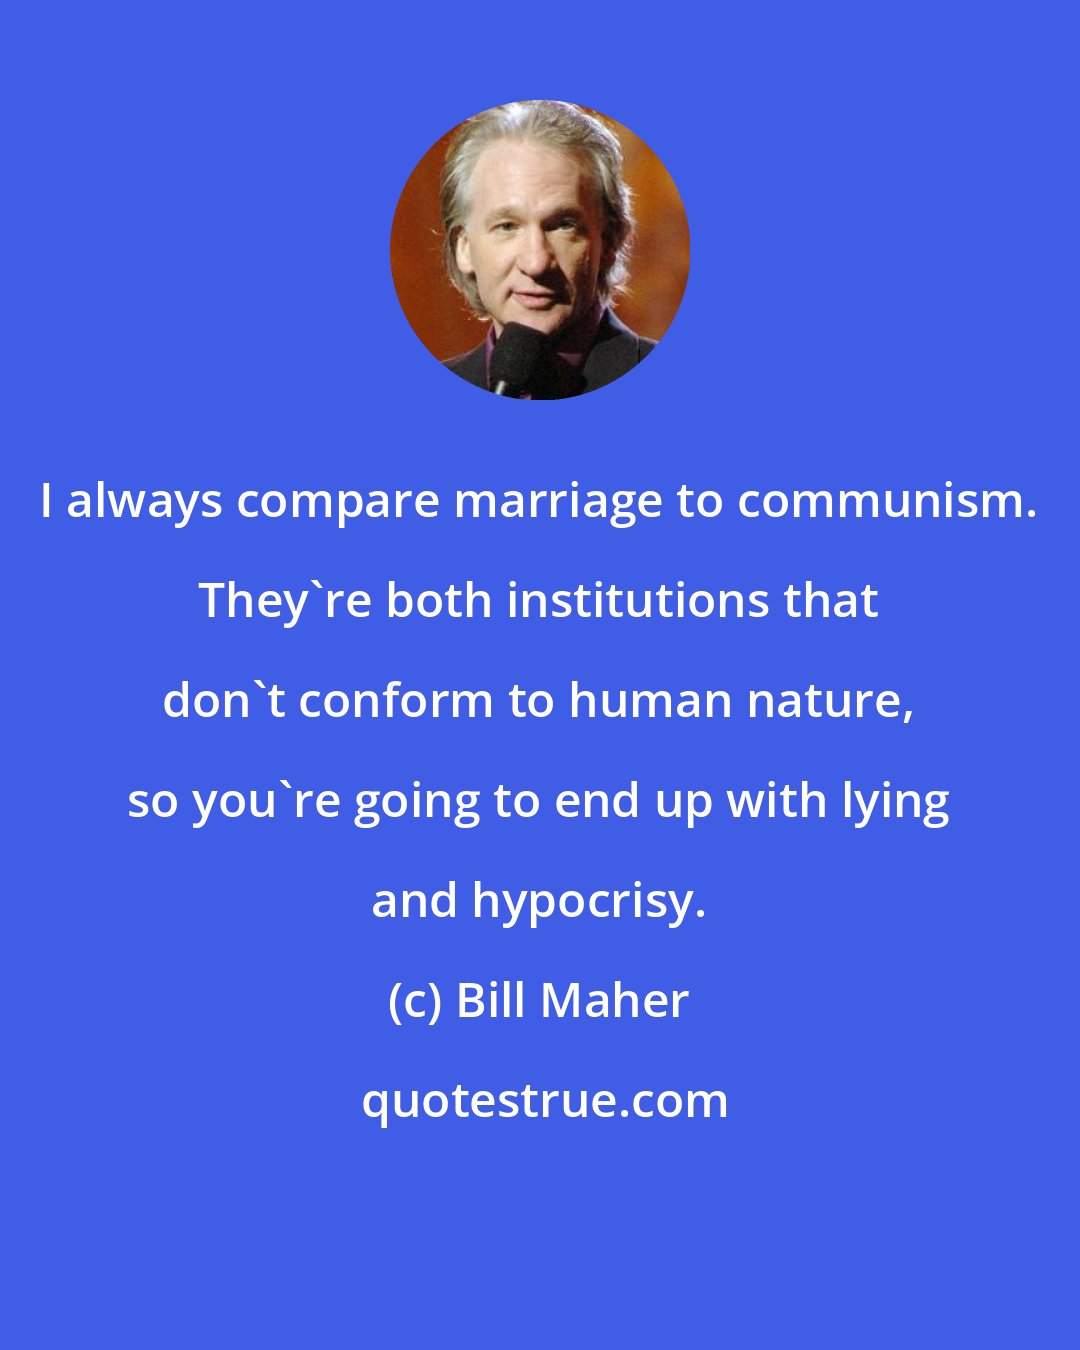 Bill Maher: I always compare marriage to communism. They're both institutions that don't conform to human nature, so you're going to end up with lying and hypocrisy.